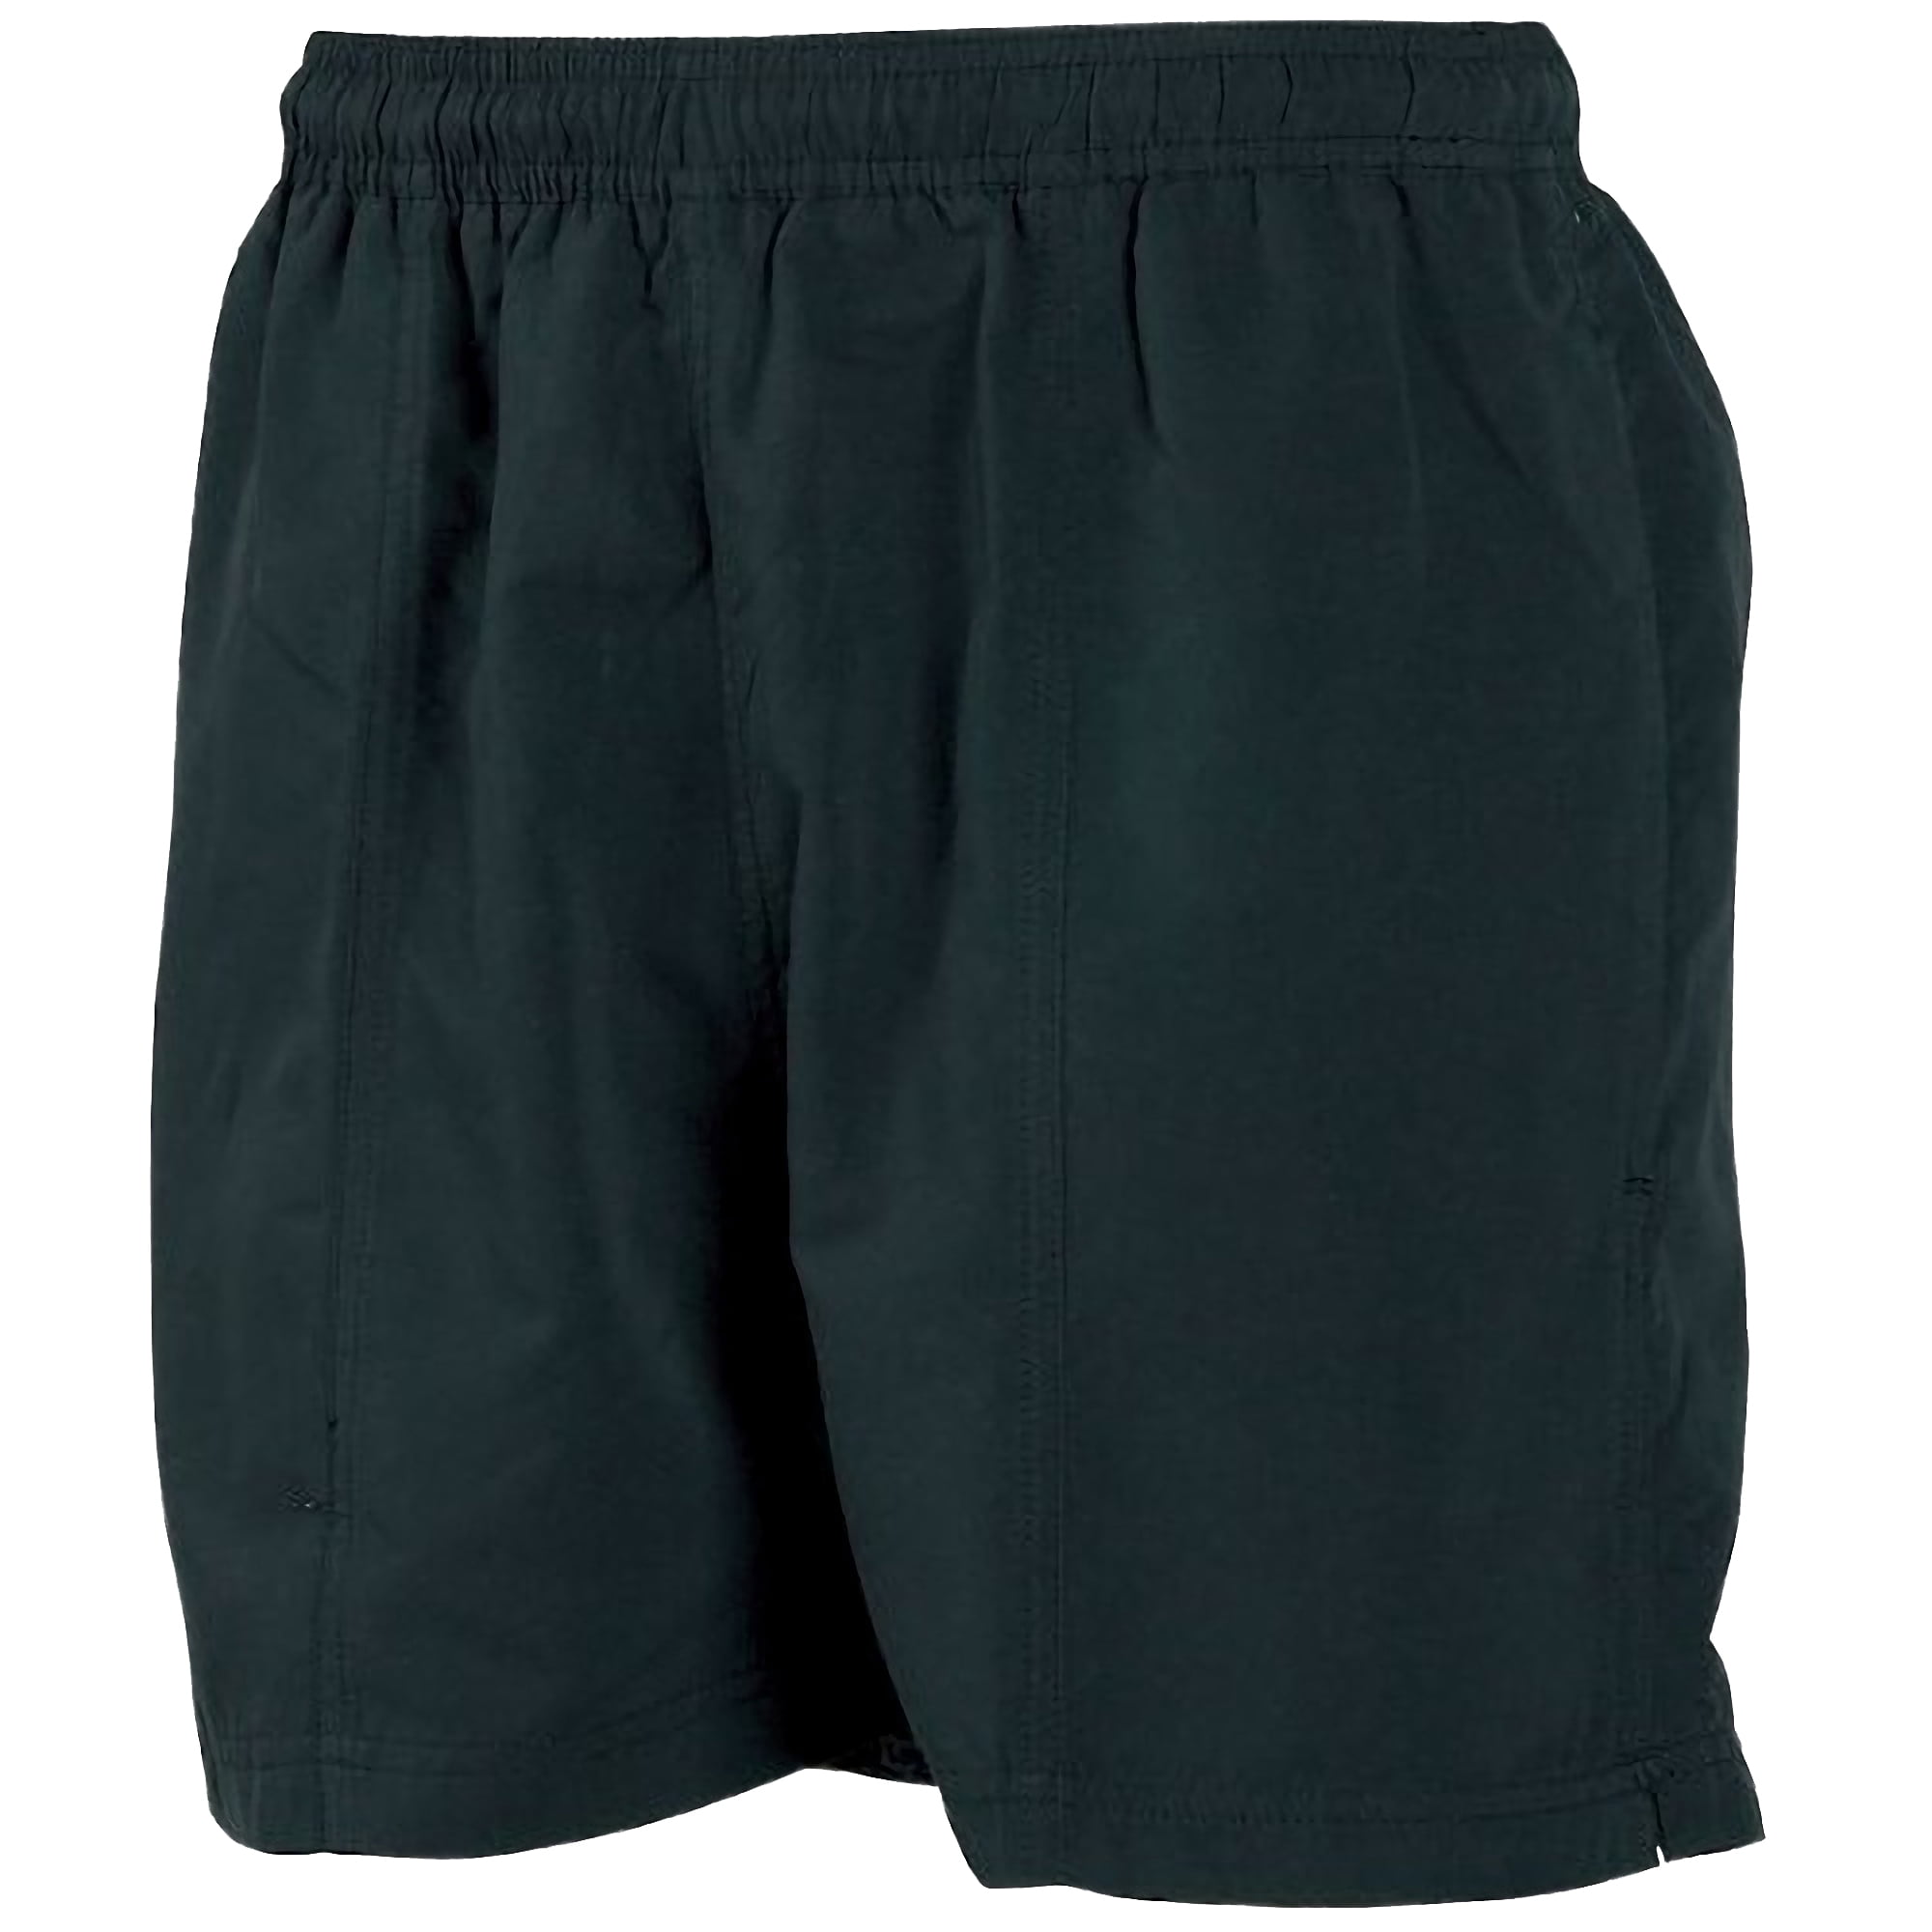 Tombo Teamsport Womens All Purpose Lined Shorts